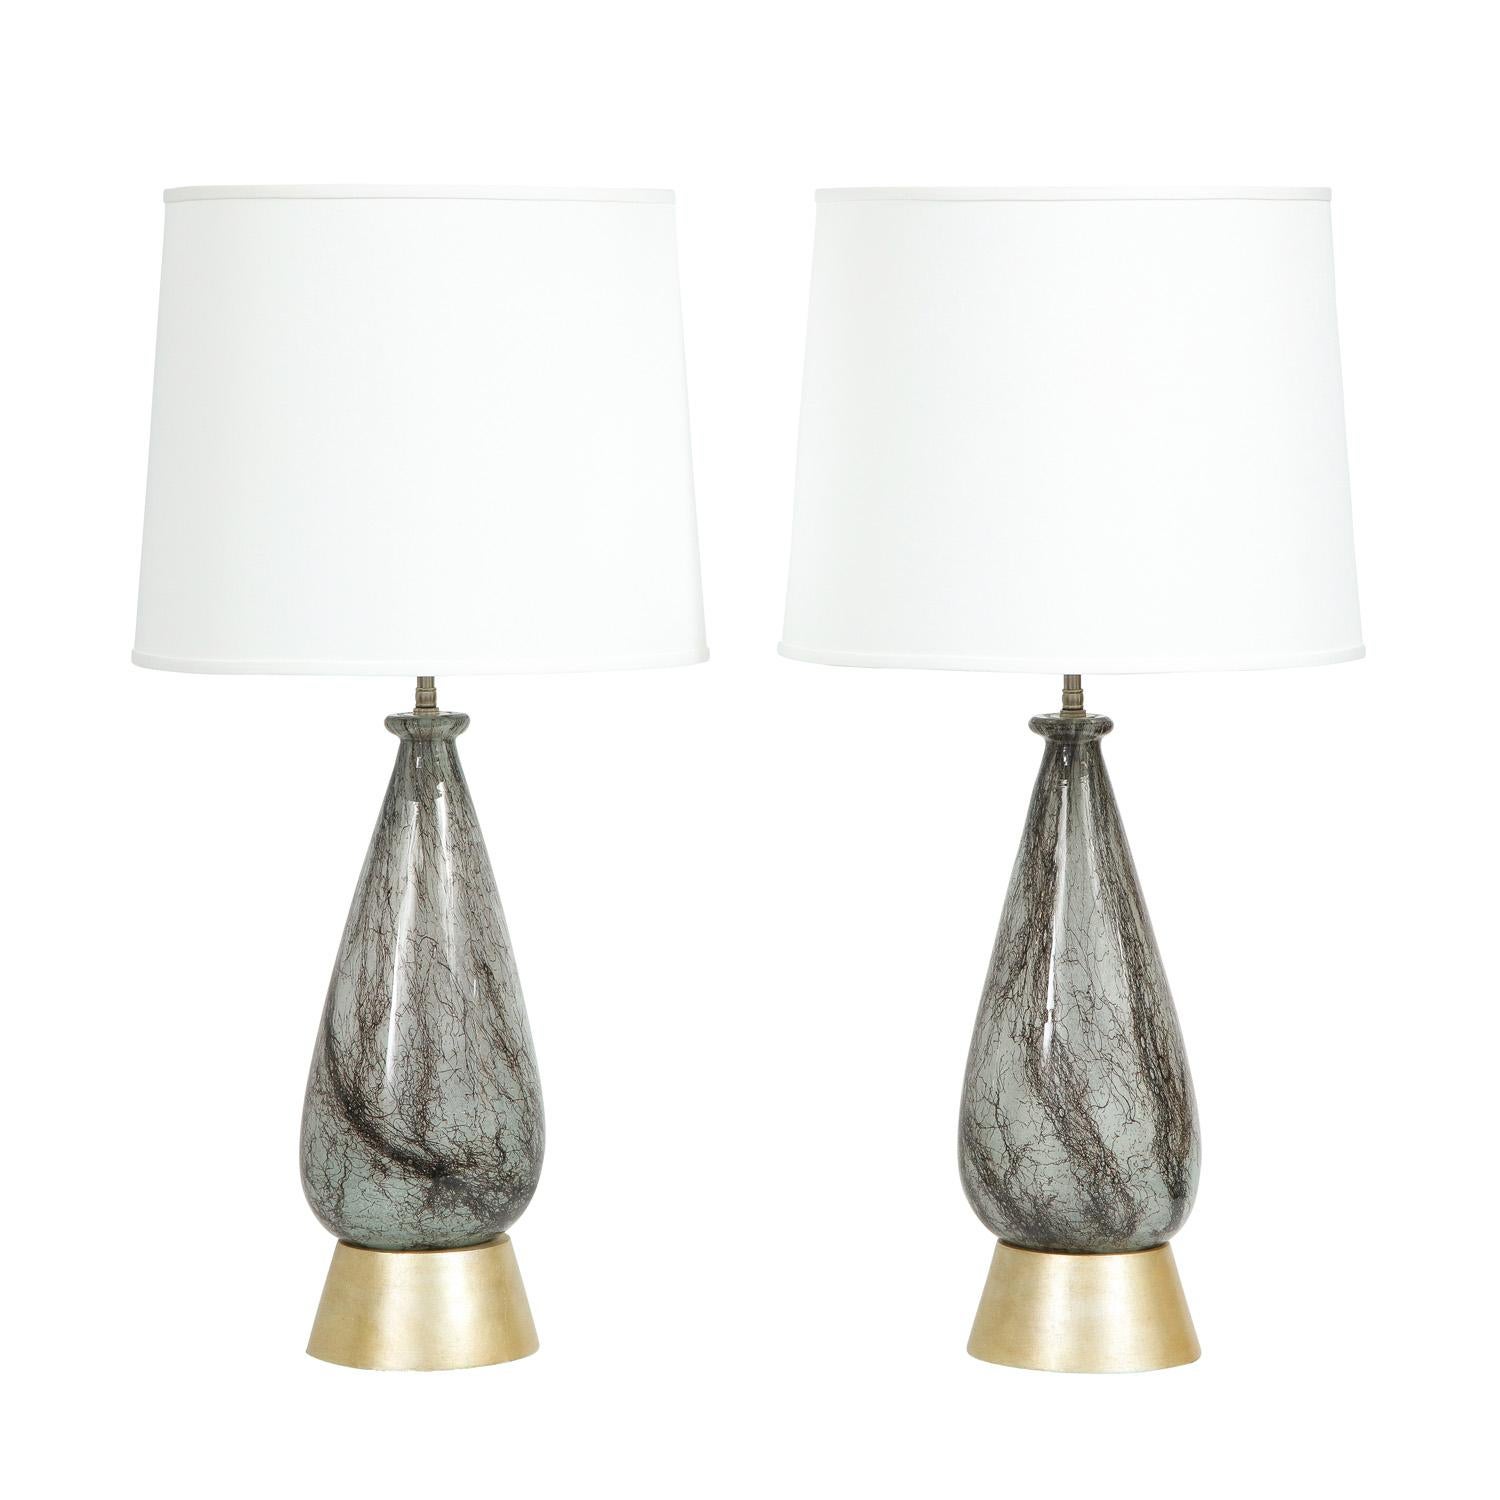 Pair of hand blown glass table lamps with internally blown metallic fibers and copper fragments attributed to Ercole Barovier, Murano, Italy, 1930s. These have been rewired with new chrome hardware, sockets and new custom shades. Bases have been